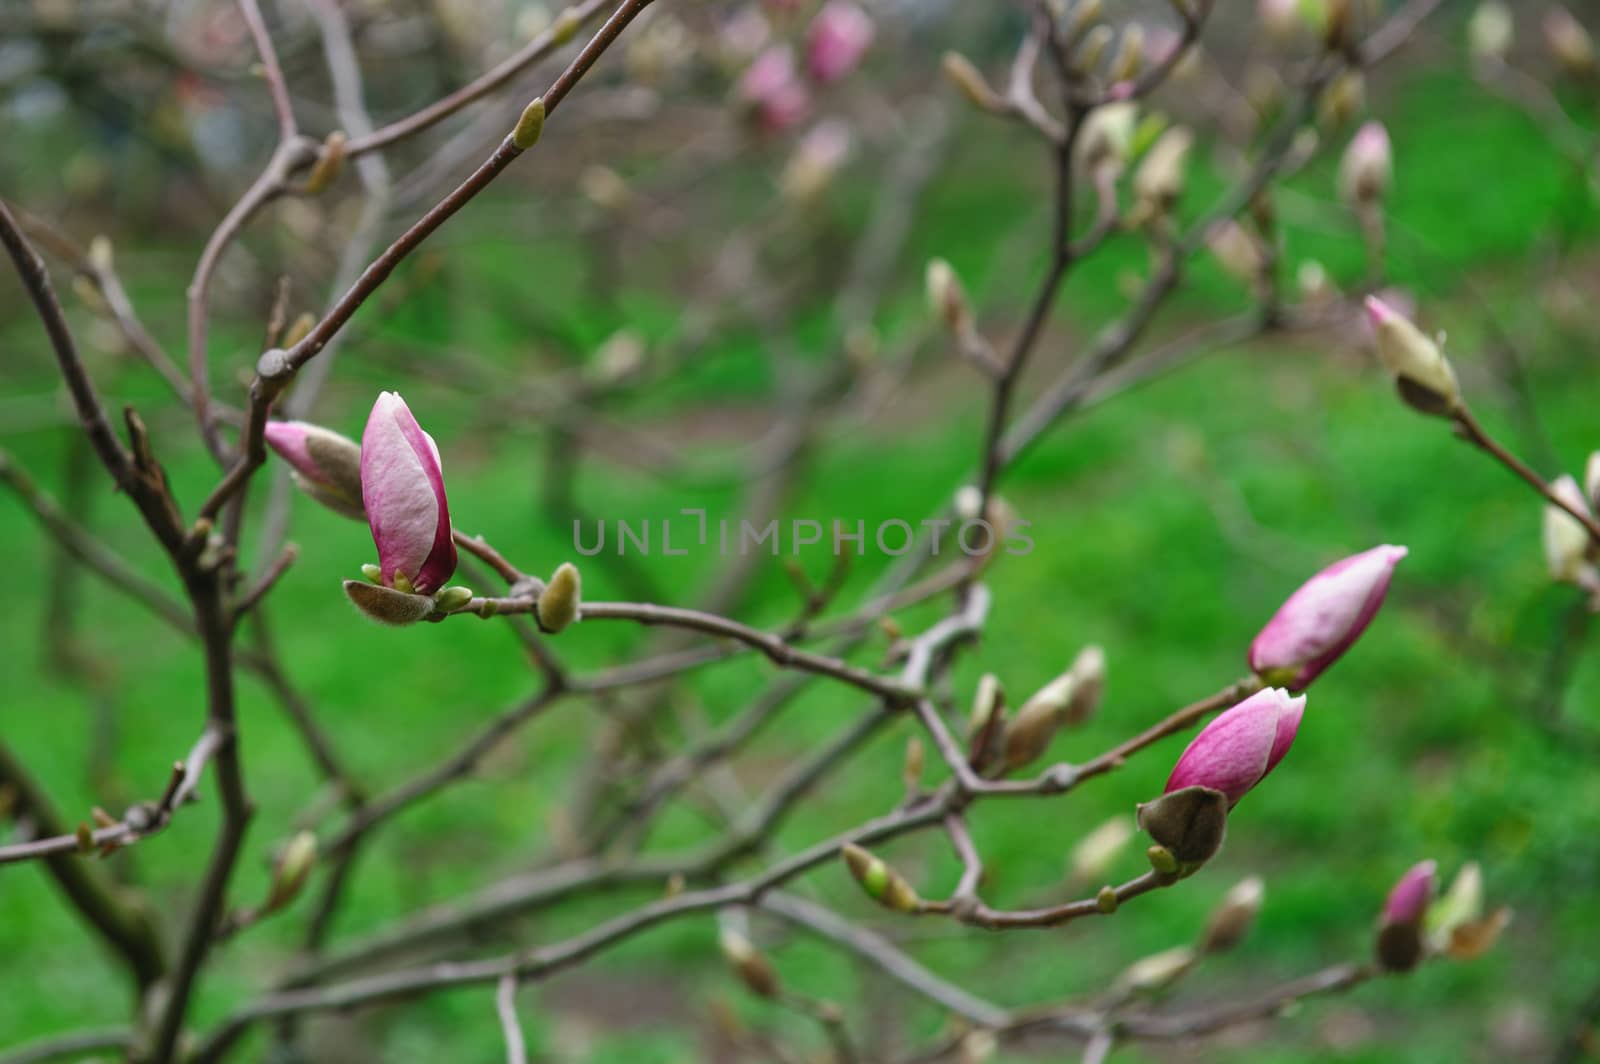 blooming magnolia tree in the spring garden by timonko